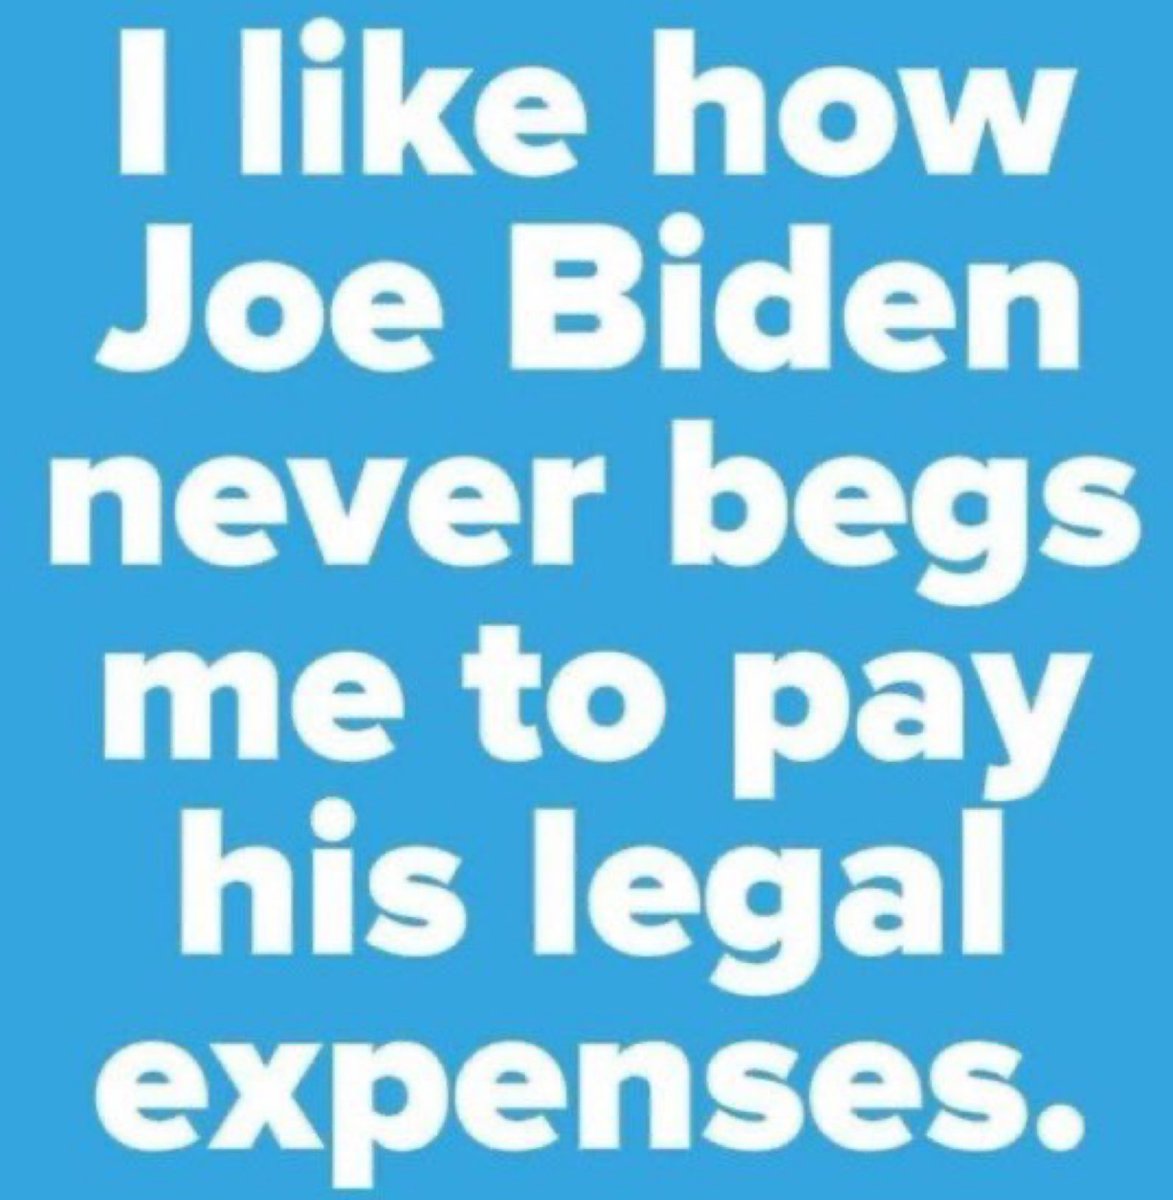 There are so many reasons that I will vote for Joe Biden, here’s another one.

#FreshResists